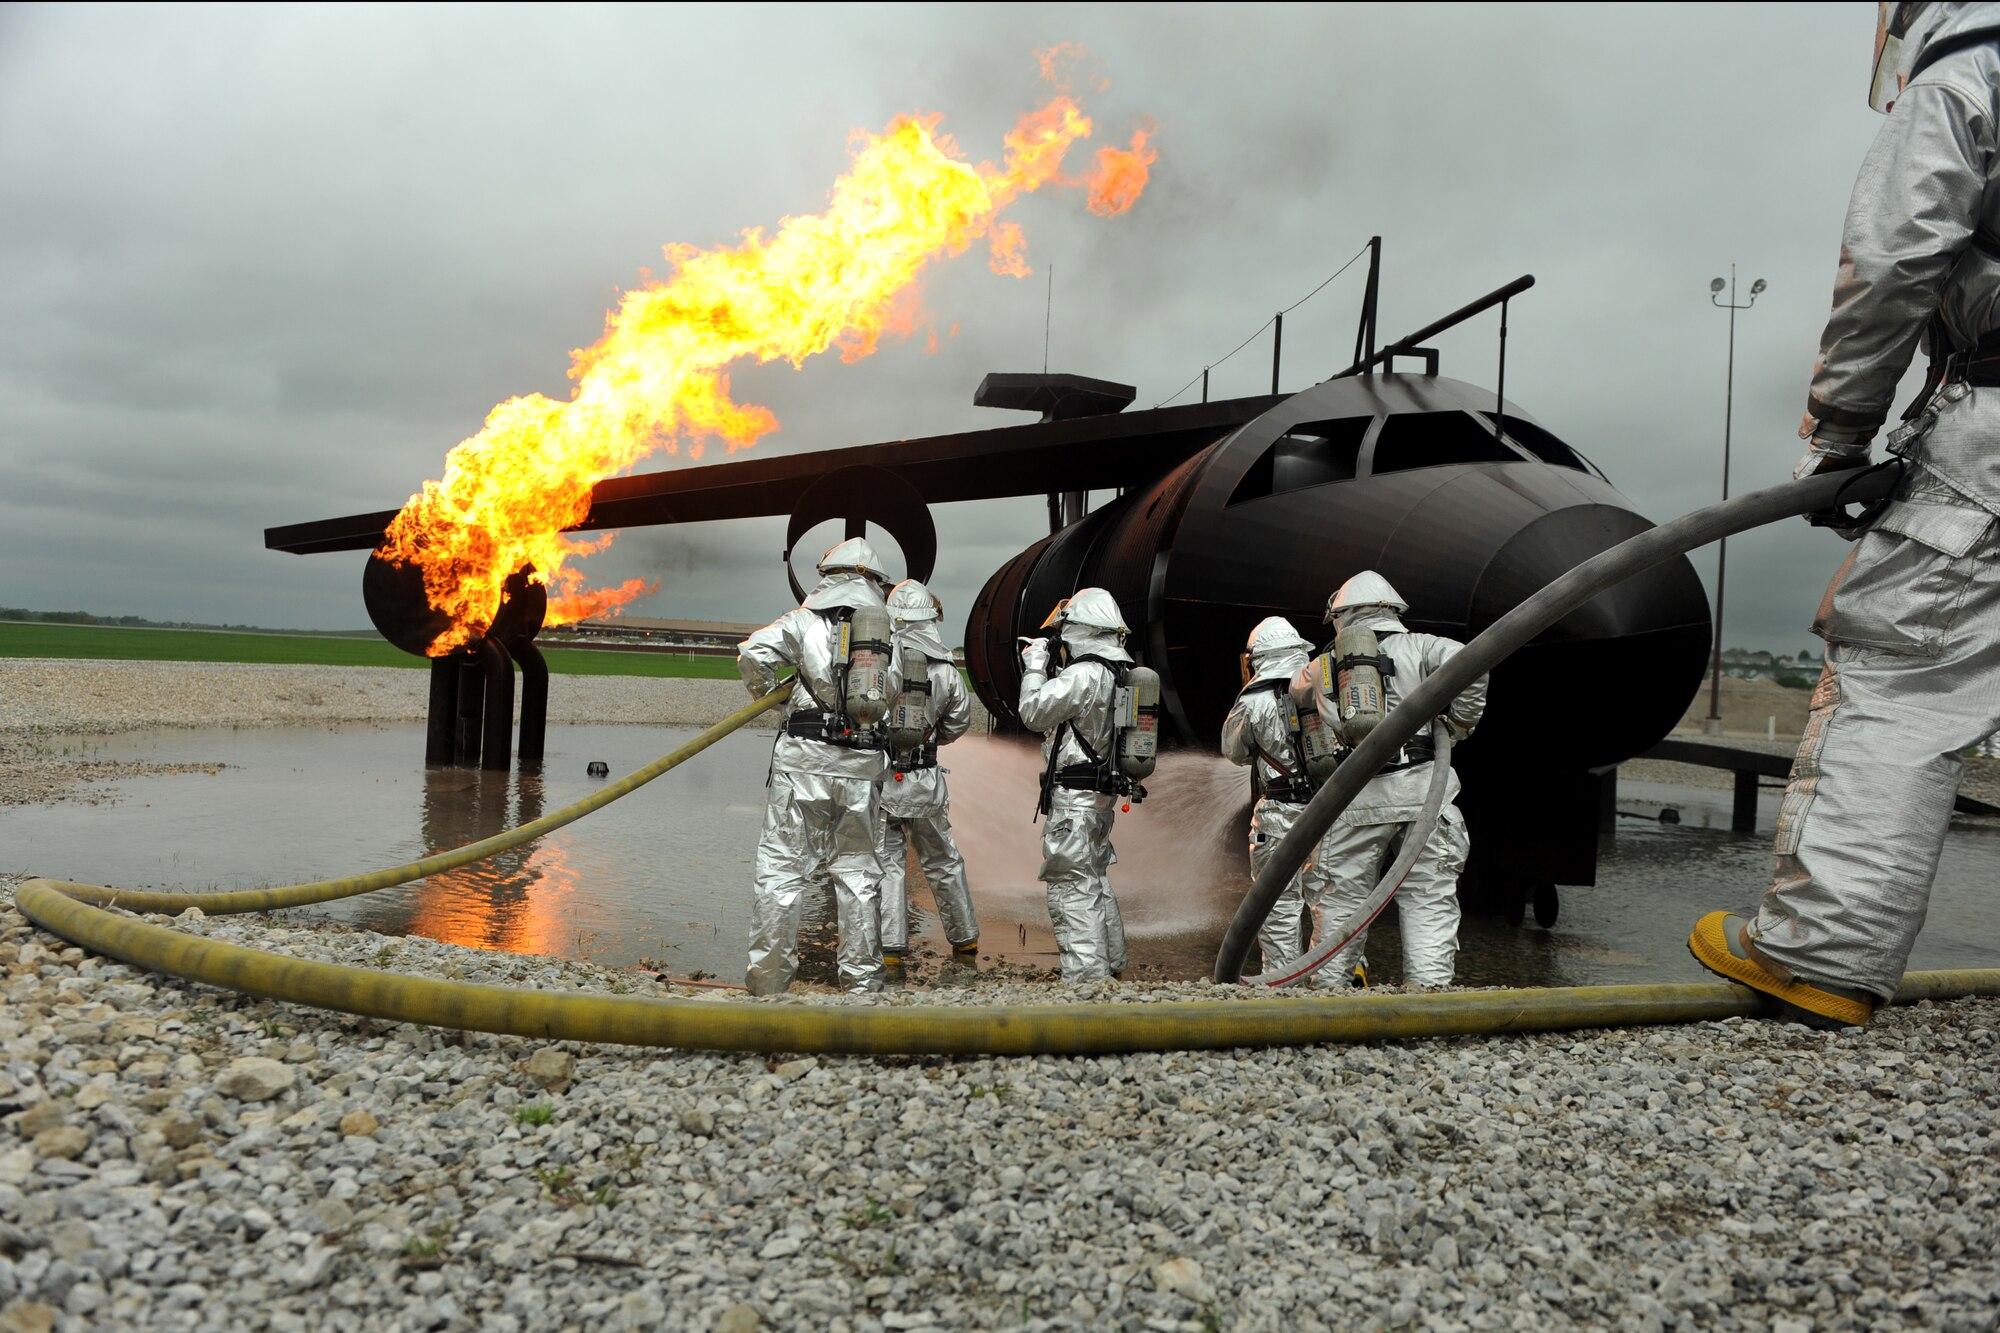 OFFUTT AIR FORCE BASE Neb. - Offutt firefighters extinguish the flames in a simulated aircraft fire trainer during a joint training exercise here May 6. Firefighters from Offutt, Omaha's Eppley airfield and guard and reserve units participated in the training.

U.S. Air Force photo by Josh Plueger